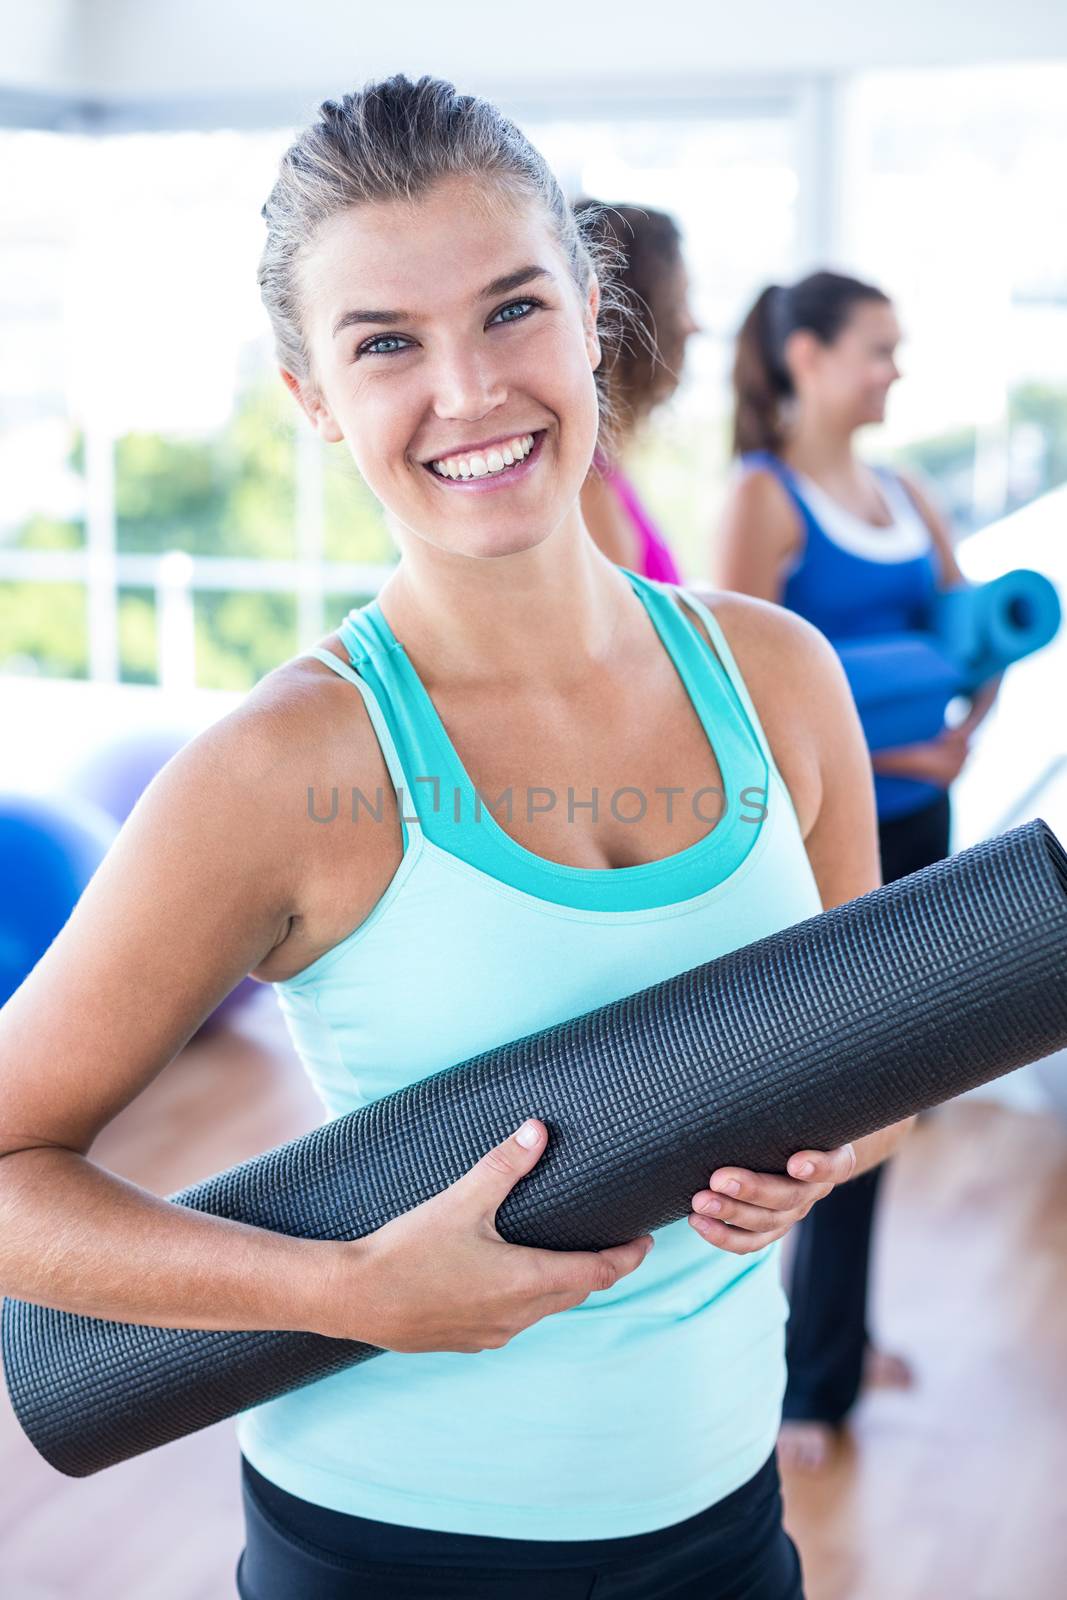 Portrait of beautiful woman smiling while holding exercise mat in fitness studio